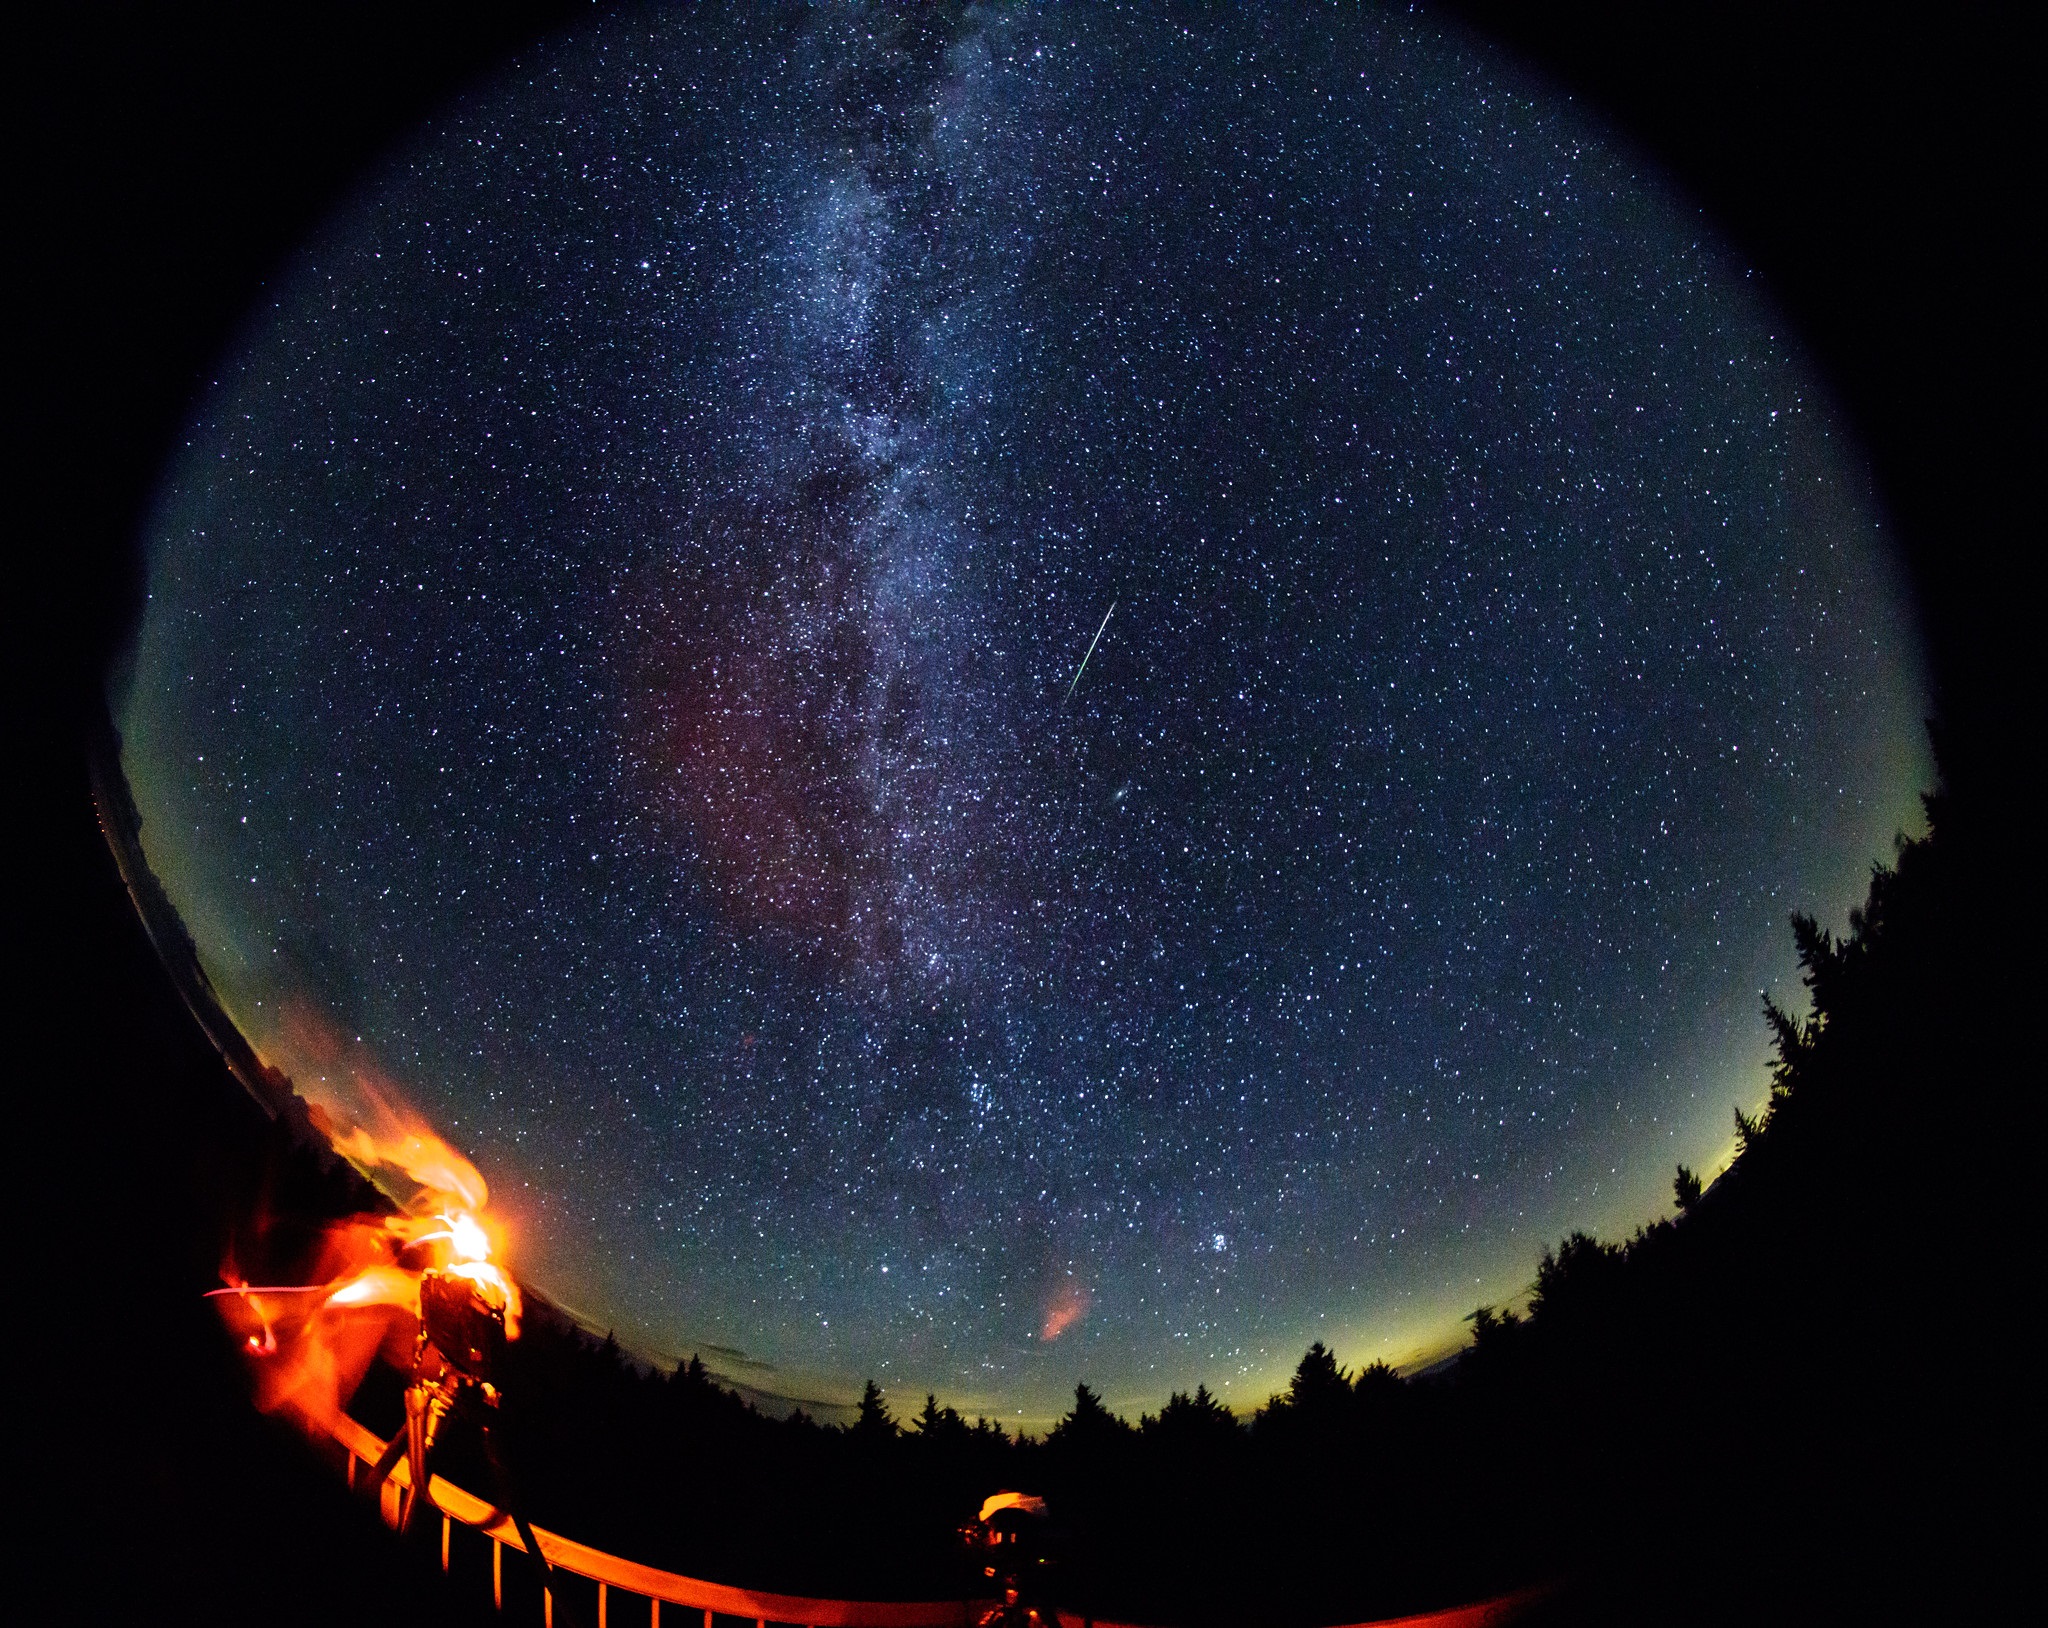 In this 30 second exposure taken with a circular fish-eye lens, a meteor streaks across the sky during the annual Perseid meteor shower on Friday, Aug. 12, 2016 in Spruce Knob, West Virginia. Photo Credit: (NASA/Bill Ingalls)
